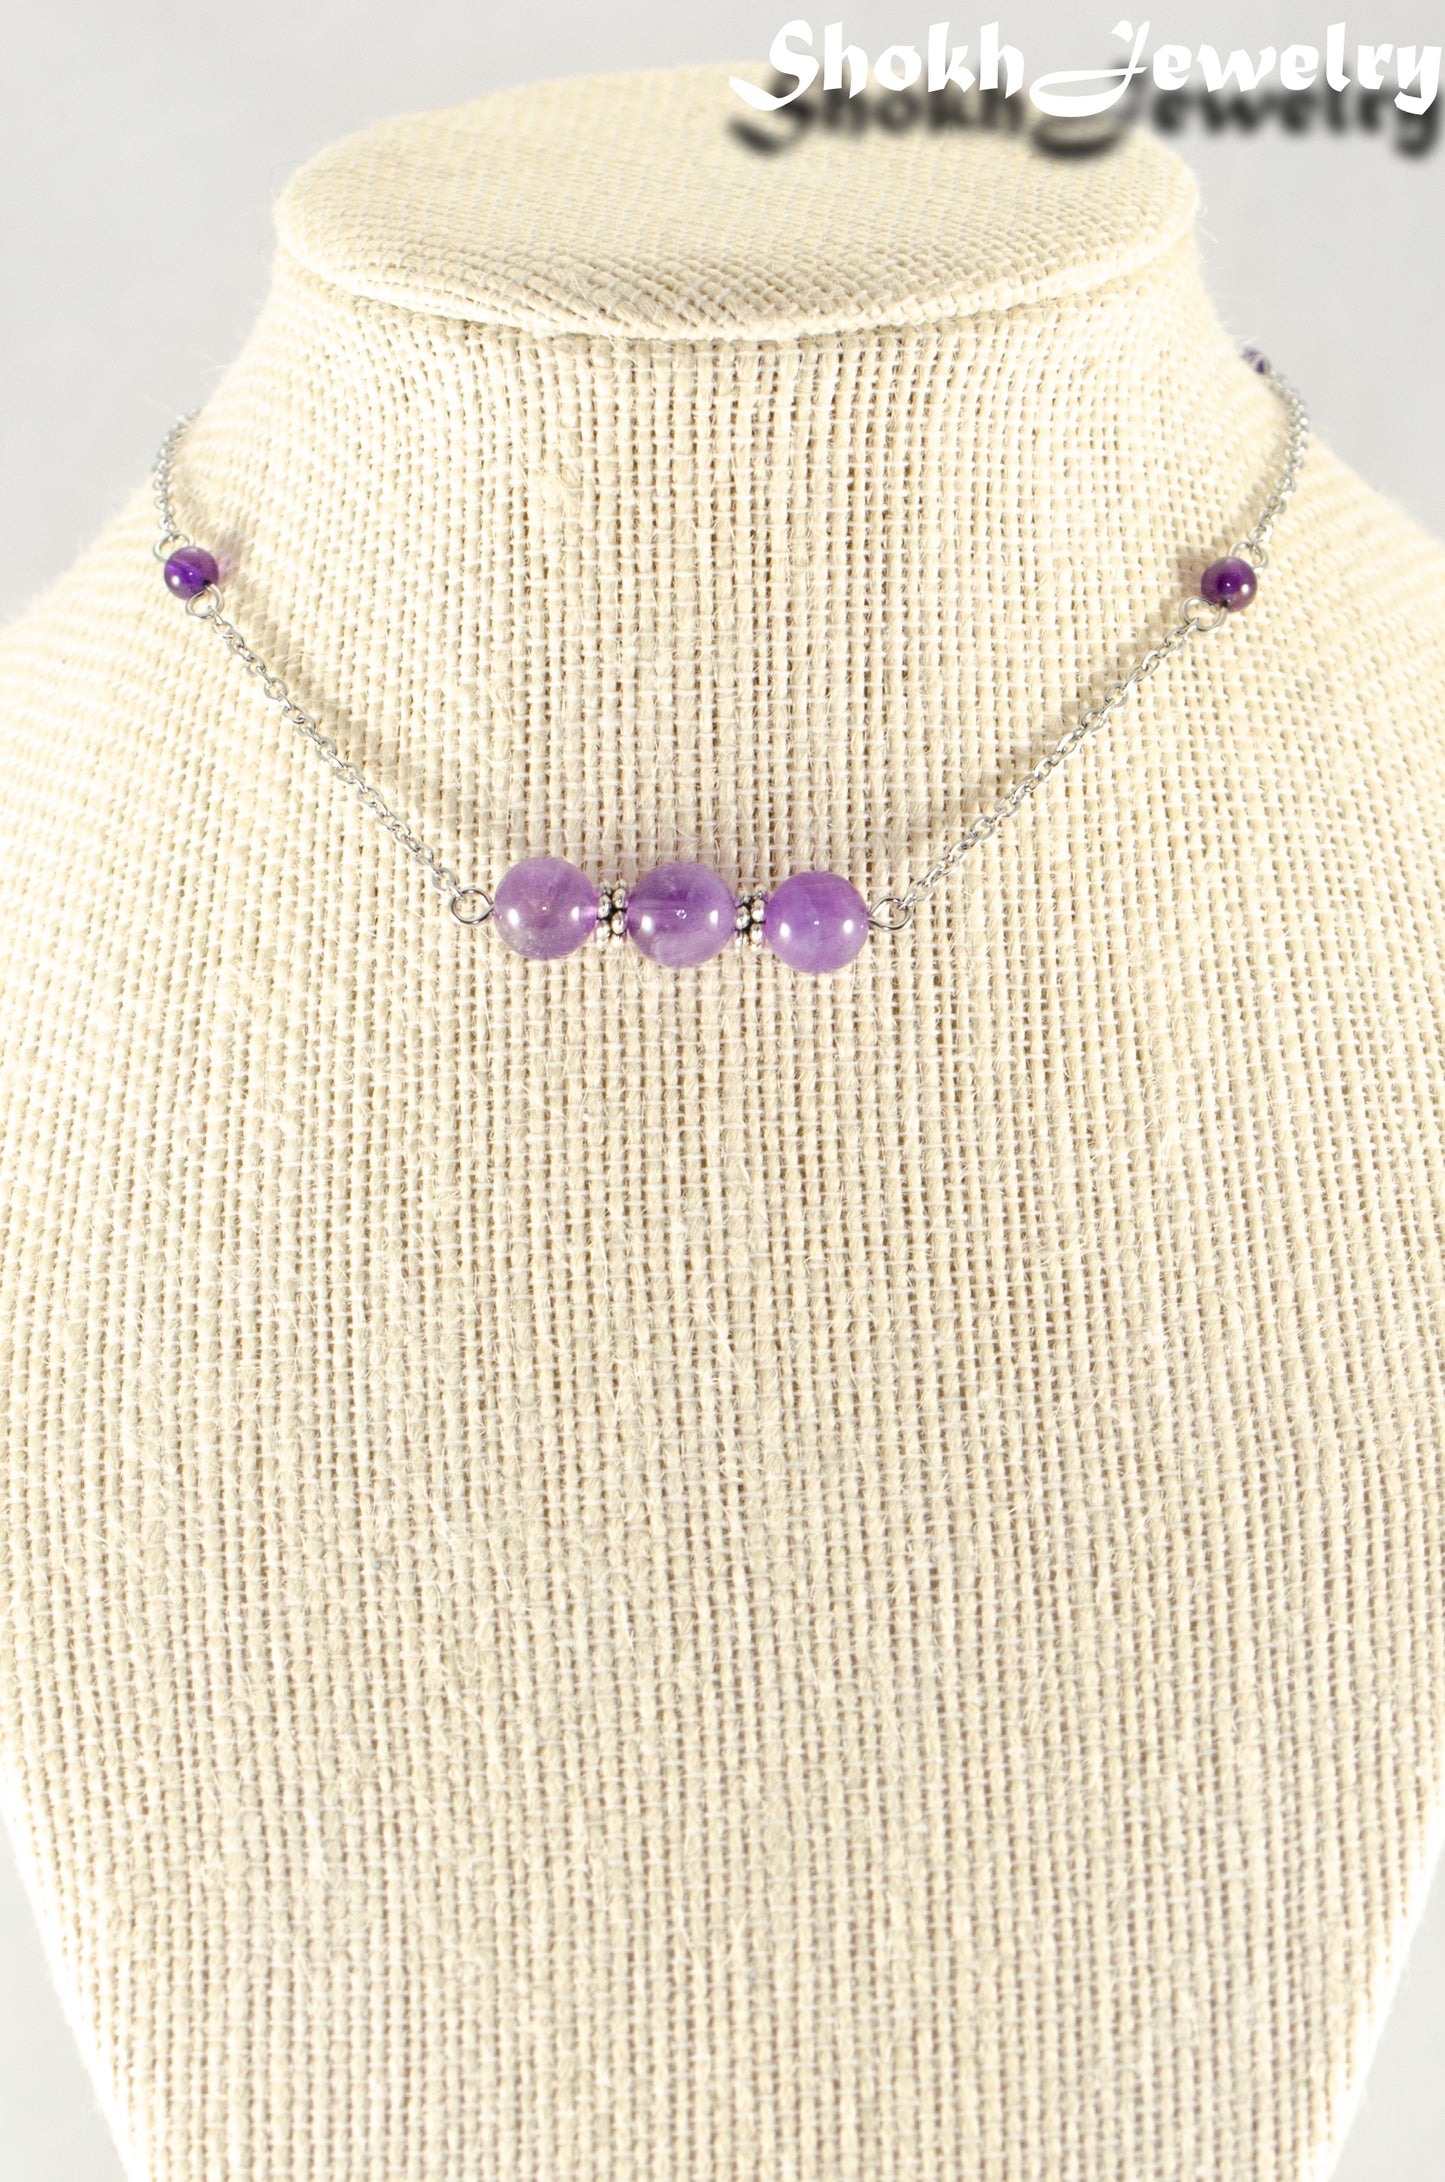 Close up of Natural Amethyst and Chain Choker Necklace.